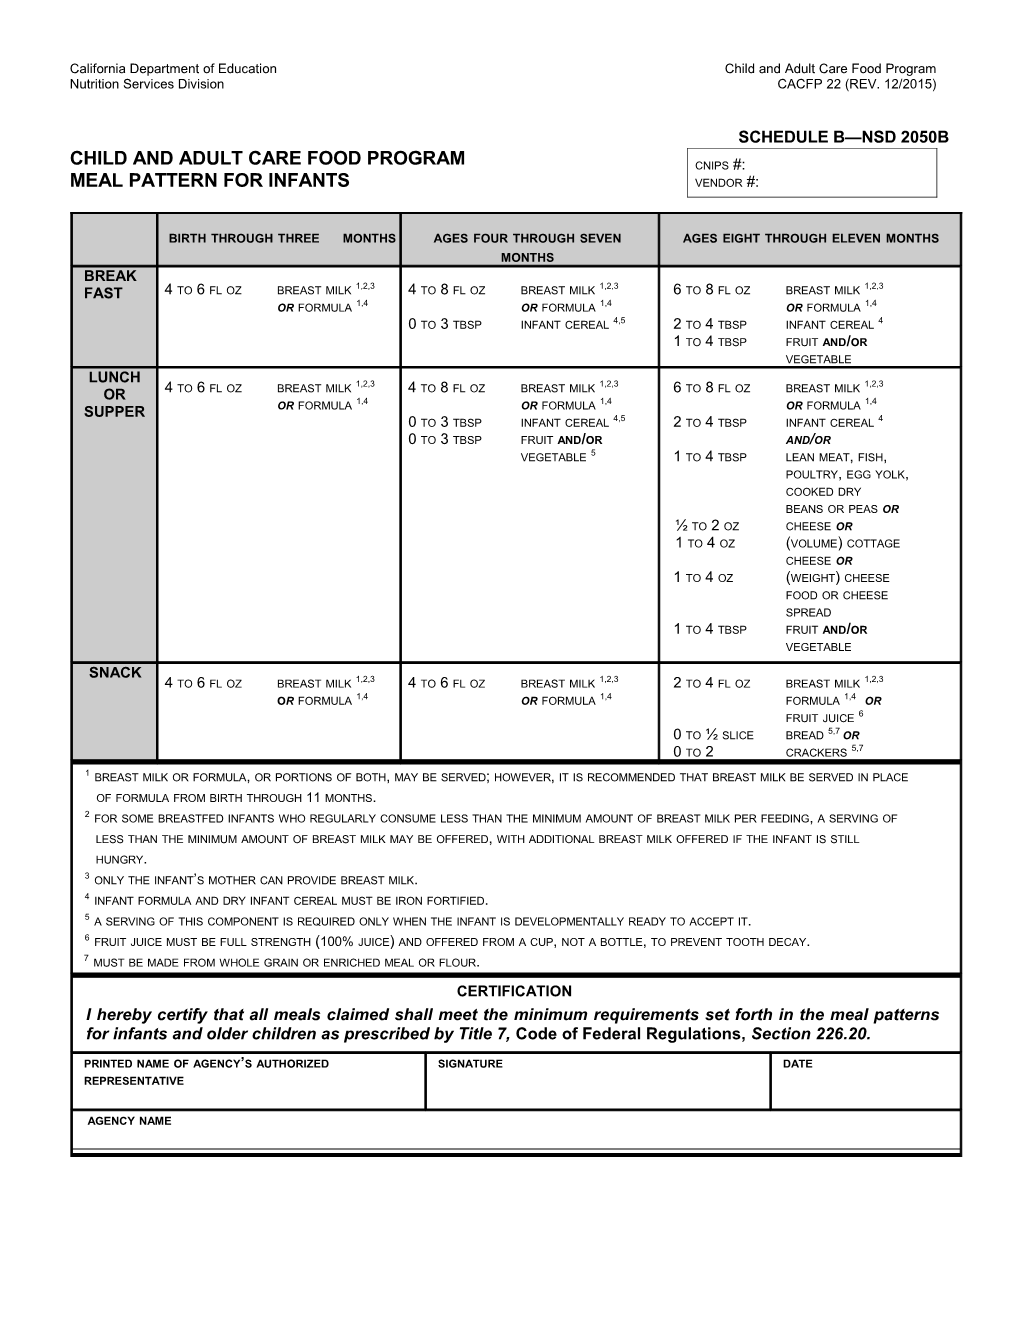 California Department of Education Child and Adult Care Food Program s1